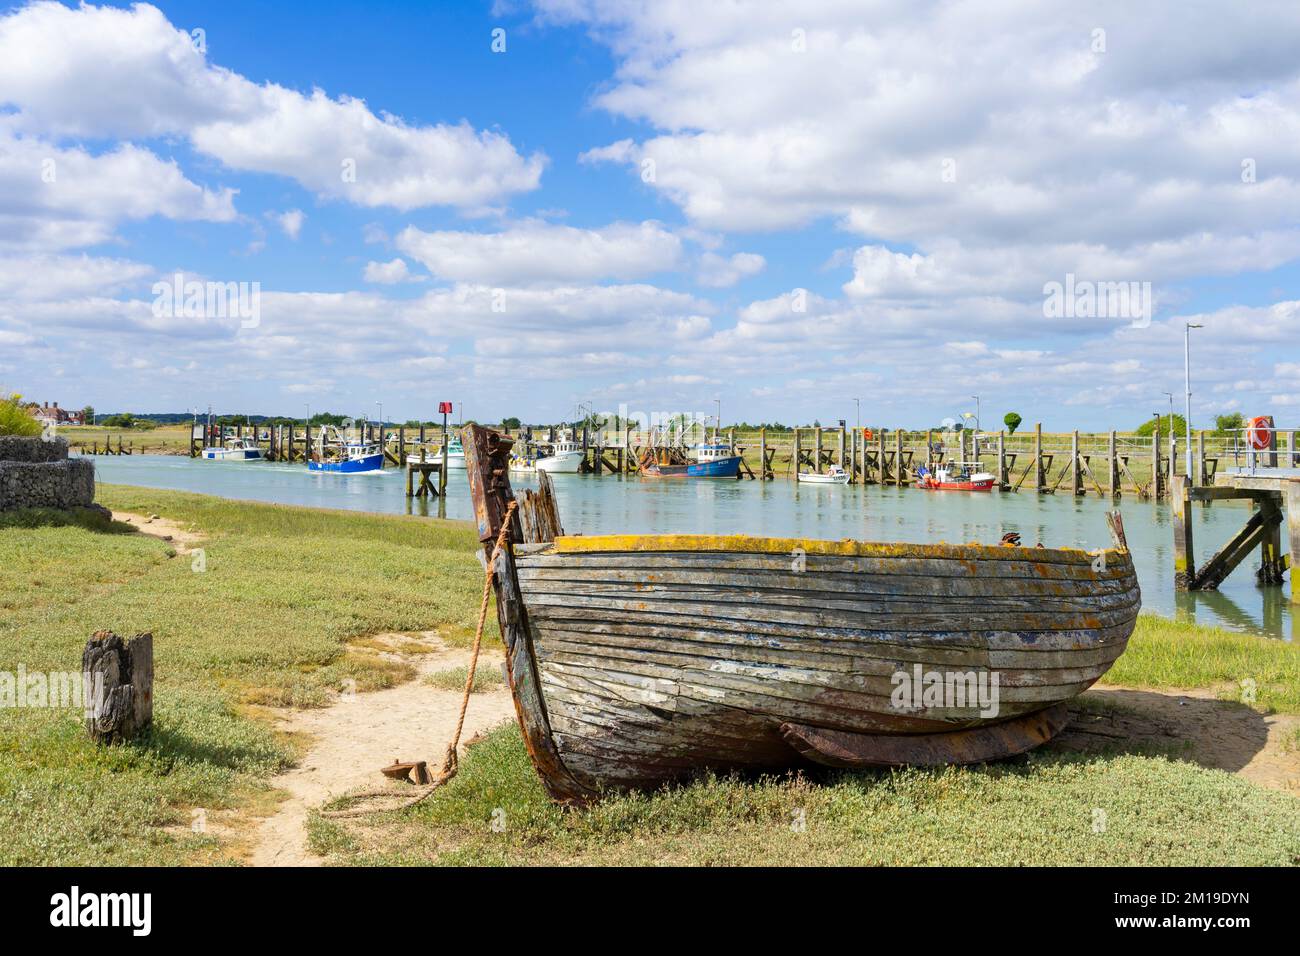 Rye harbour Old fishing boat moored on the Intertidal river banks of the River Rother at Rye Harbour village old boat Rye Sussex England UK GB Europe Stock Photo